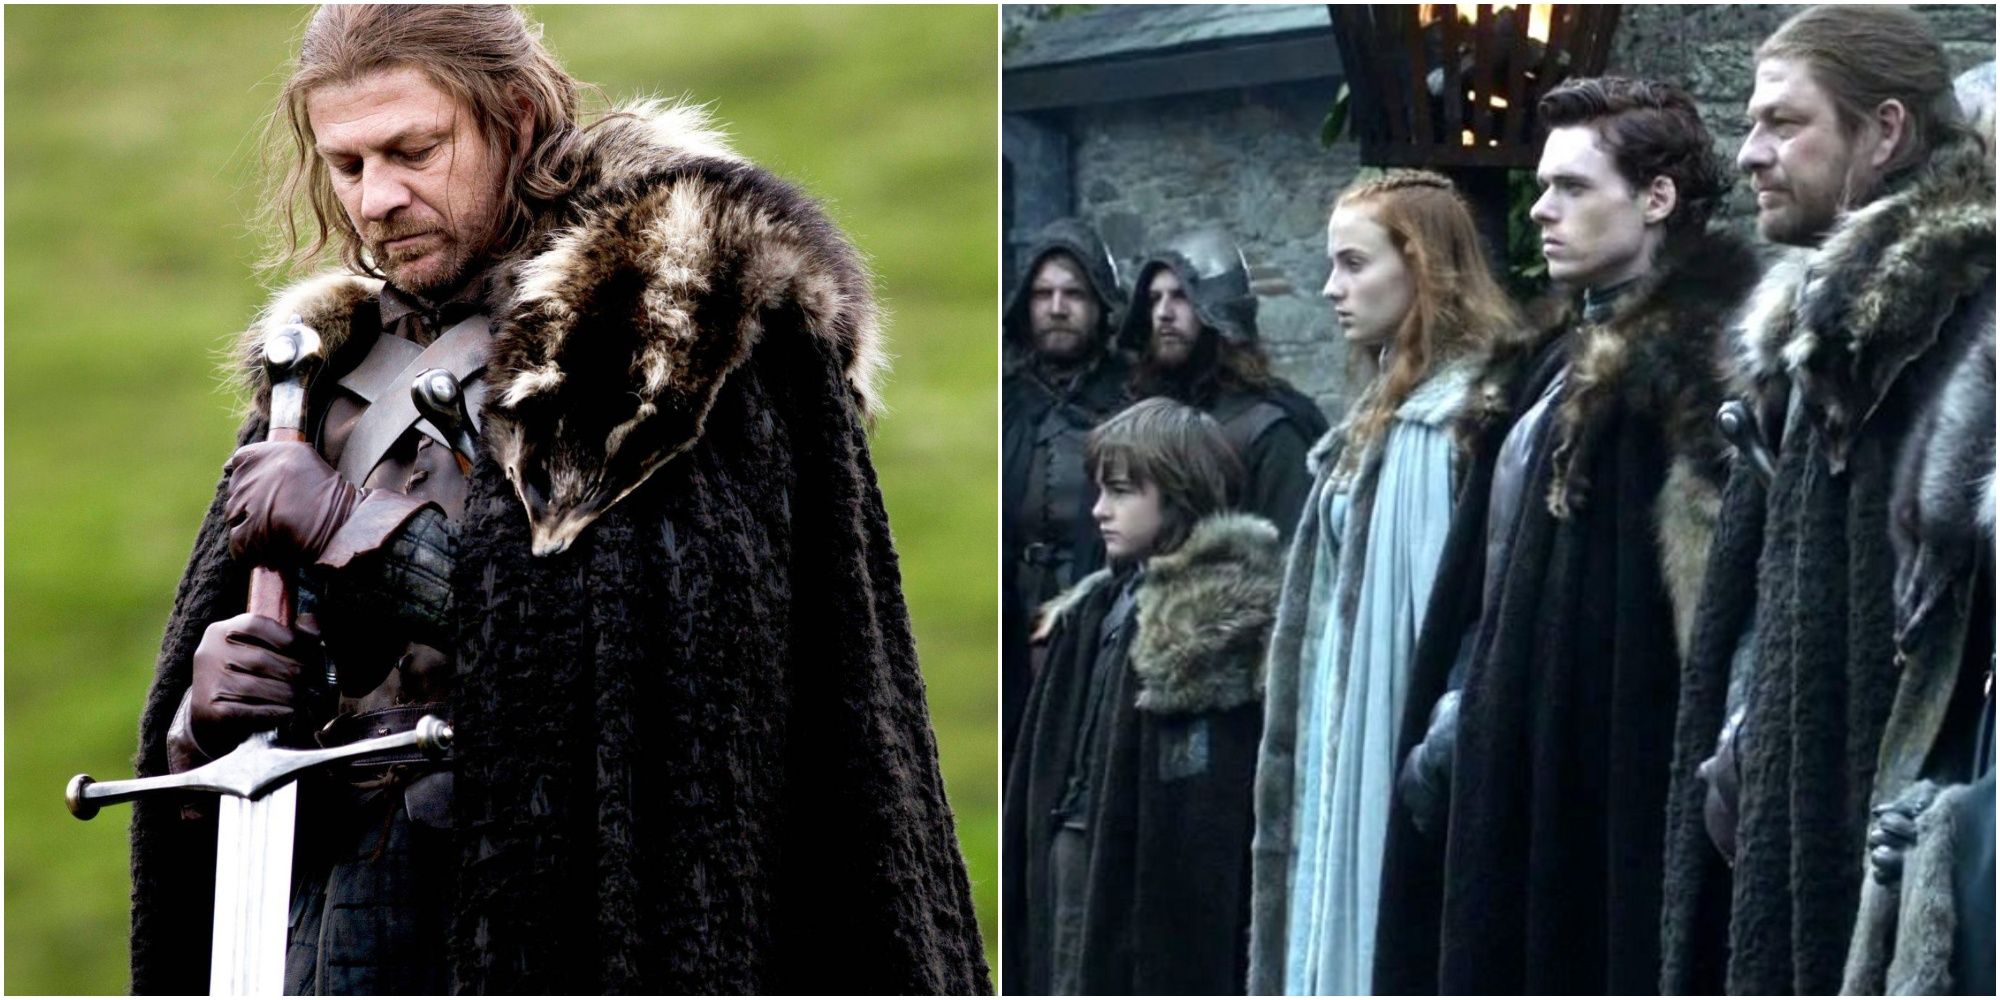 Split image showing Ned Stark and the Starks of Winterfell in Game of Thrones. 